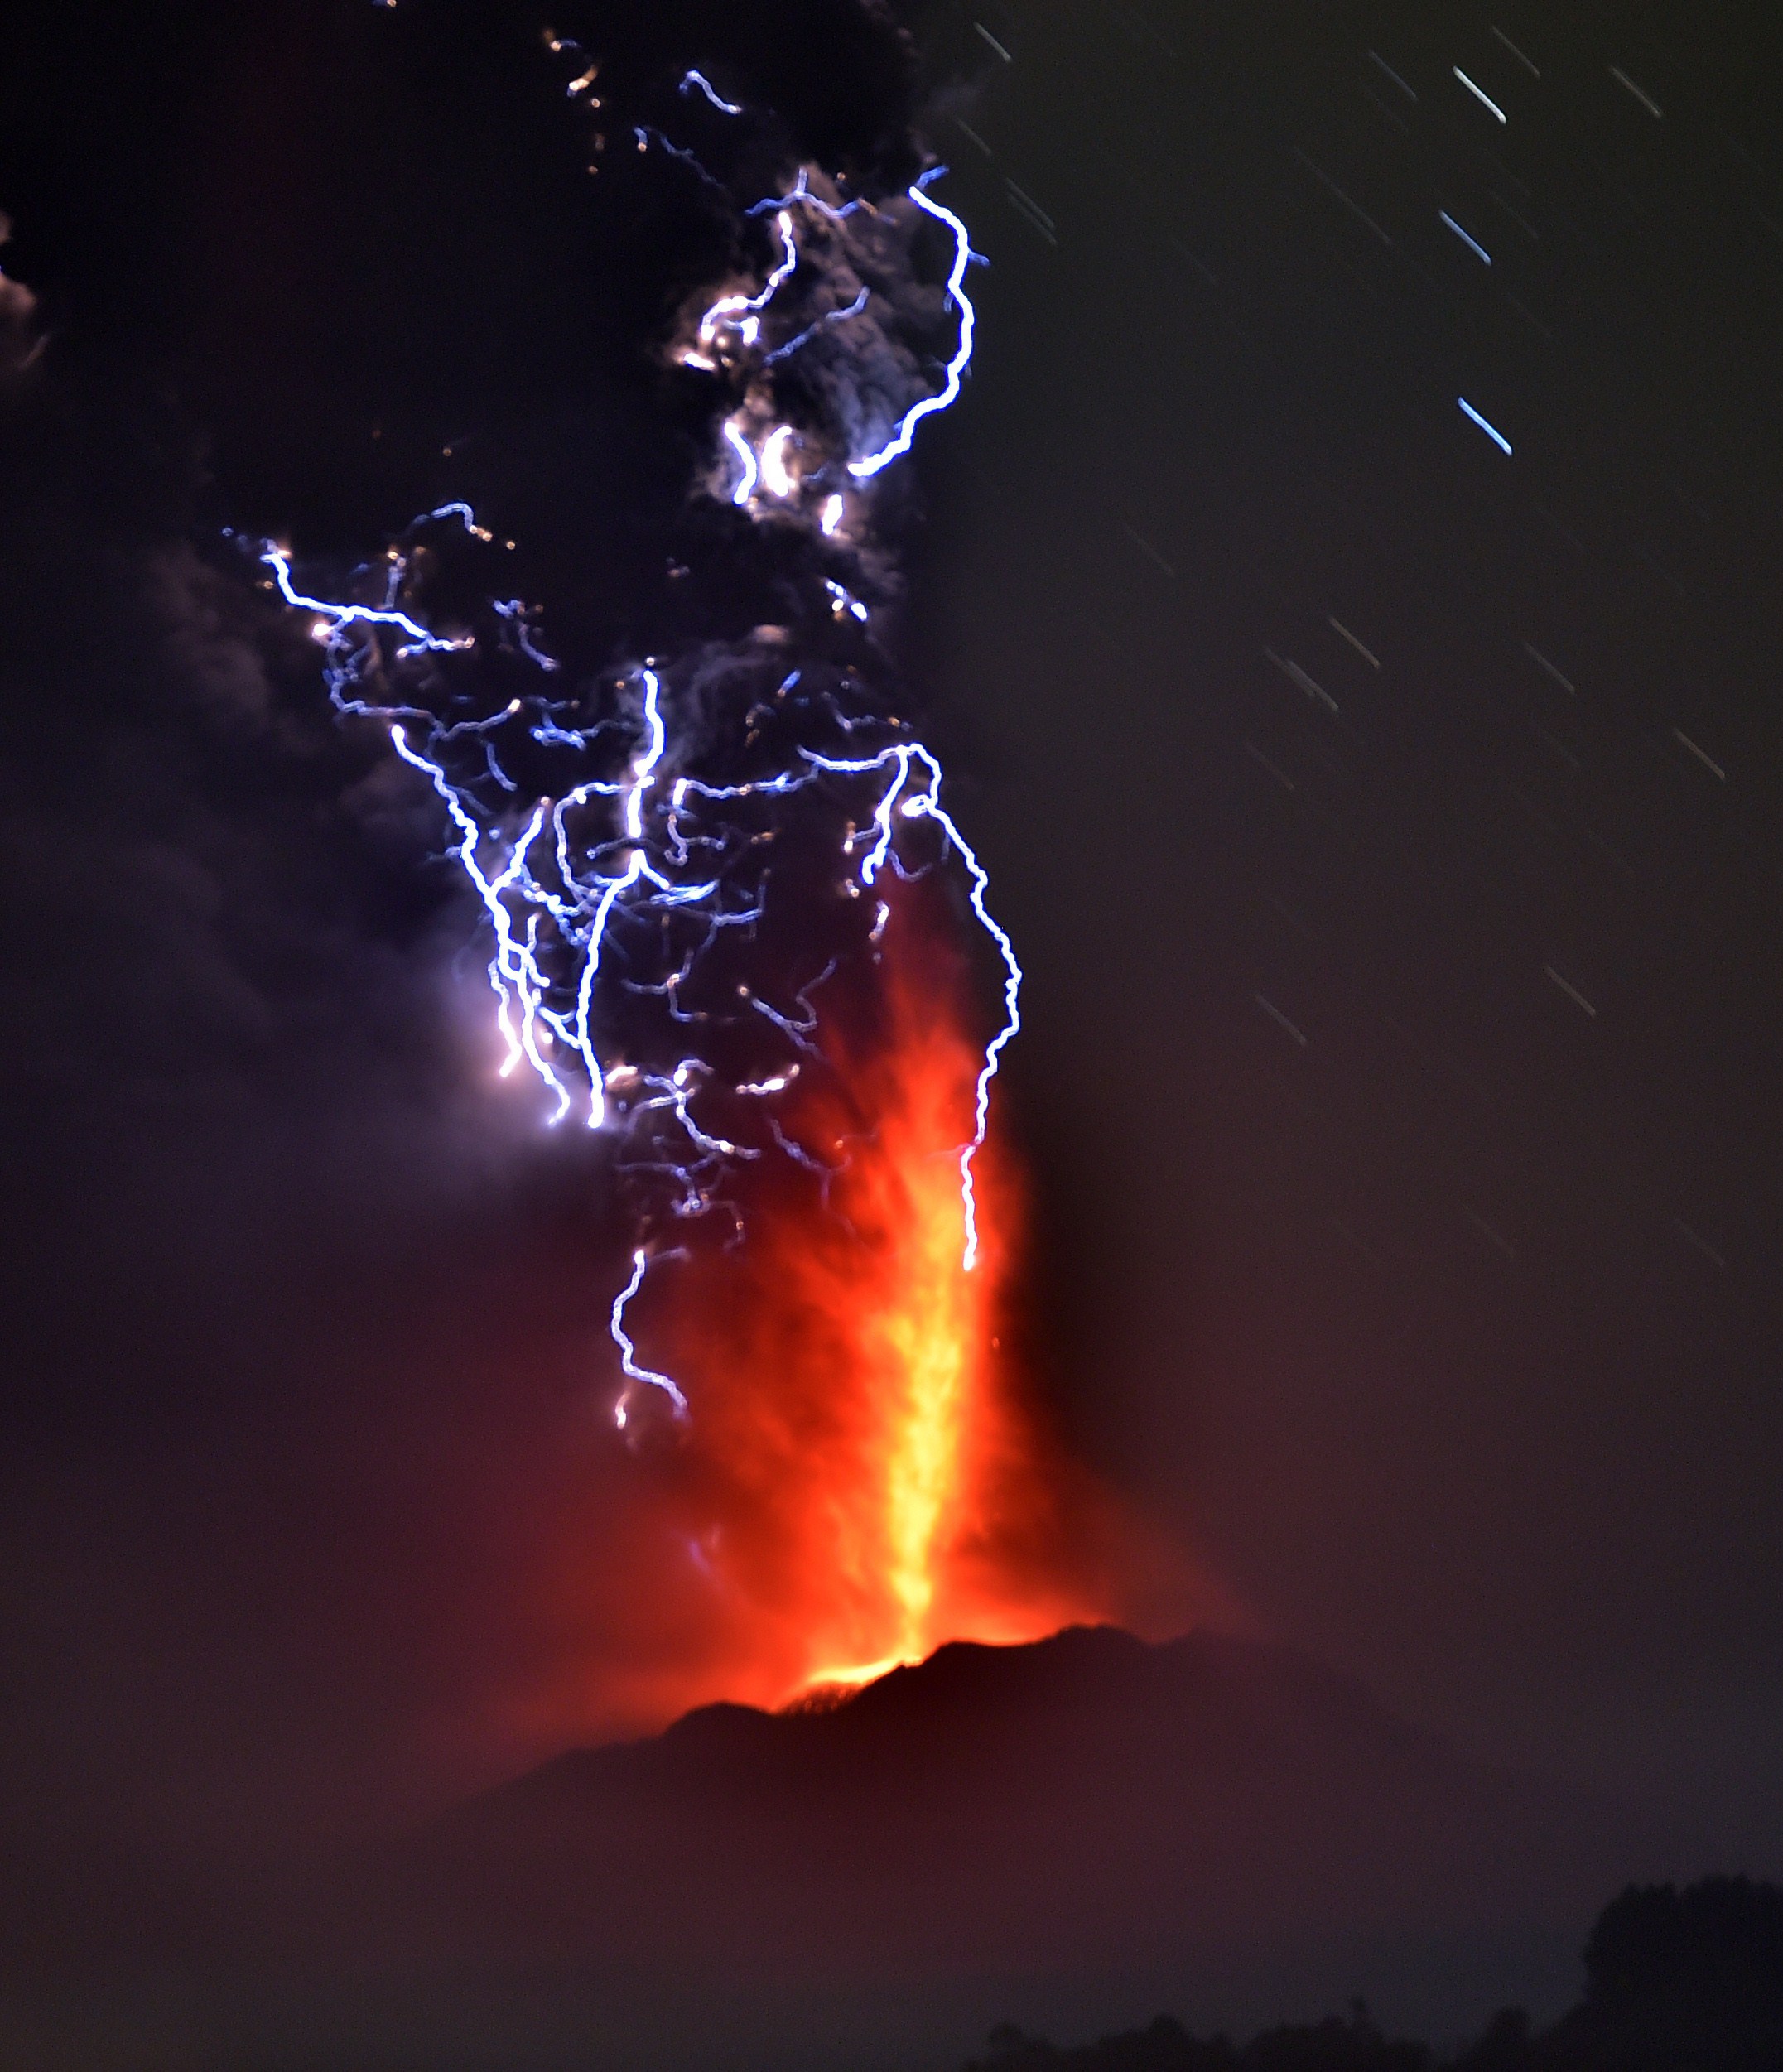 View from Frutillar, southern Chile, showing volcanic lightnings and lava spewed from the Calbuco volcano on April 23, 2015. Chile's Calbuco volcano erupted on Wednesday, spewing a giant funnel of ash high into the sky near the southern port city of Puerto Montt and triggering a red alert. Authorities ordered an evacuation for a 10-kilometer (six-mile) radius around the volcano, which is the second in southern Chile to have a substantial eruption since March 3, when the Villarrica volcano emitted a brief but fiery burst of ash and lava. AFP PHOTO/MARTIN BERNETTI/Getty Images.